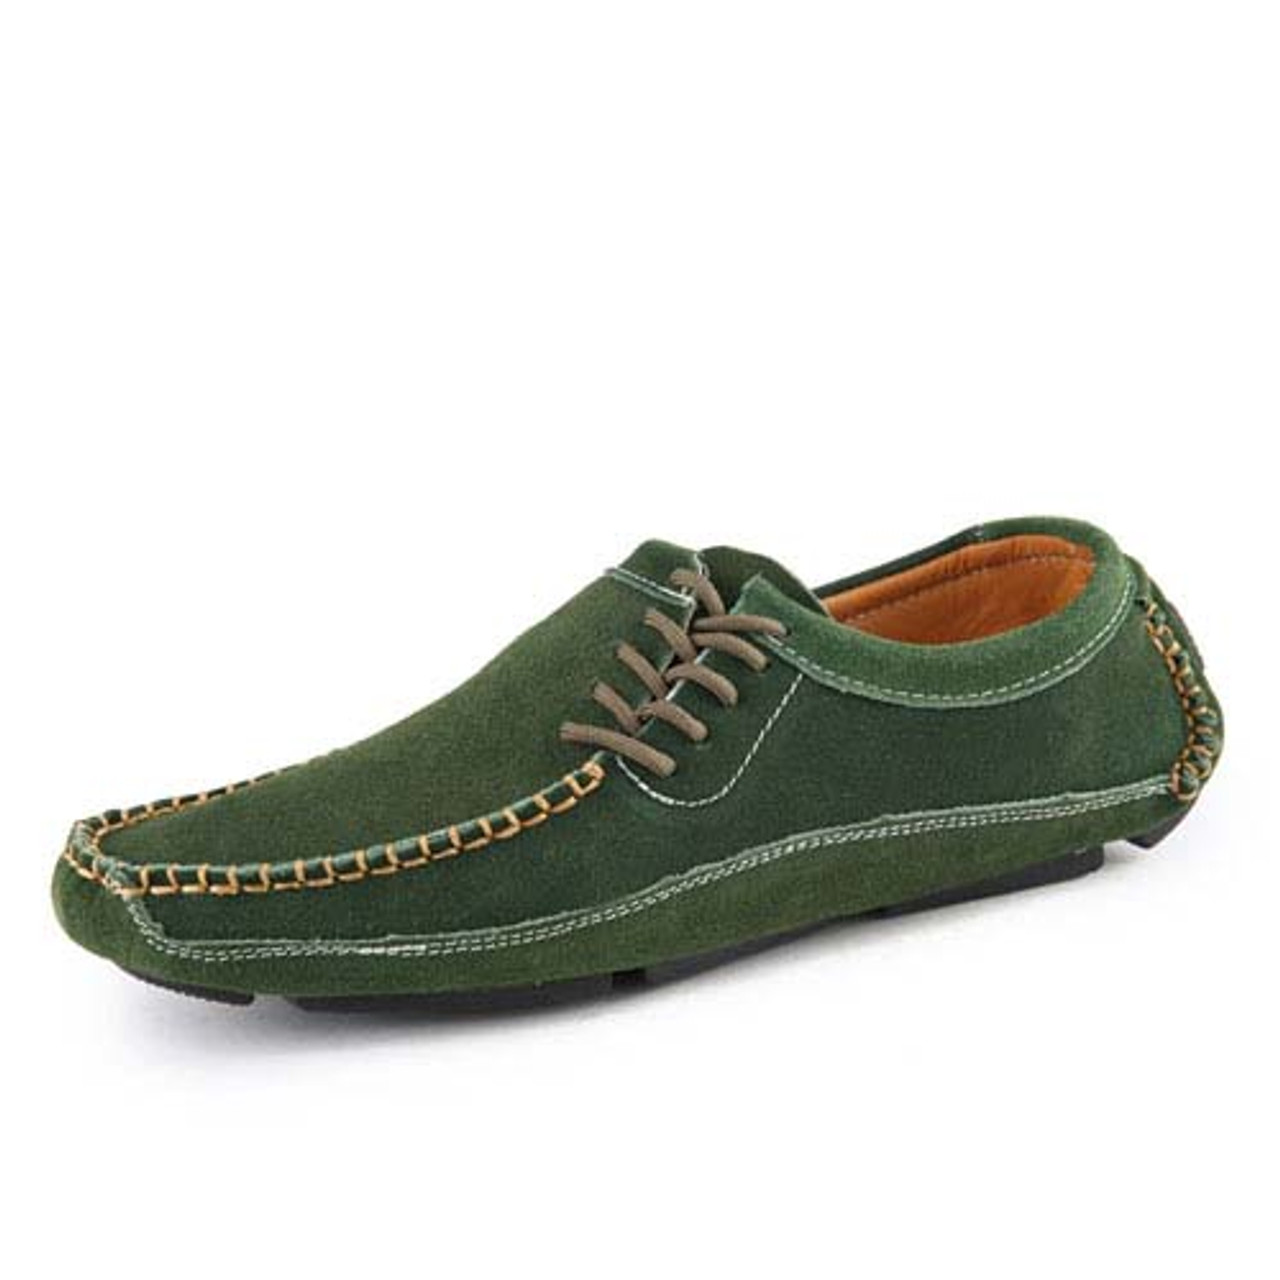 mens green leather shoes uk